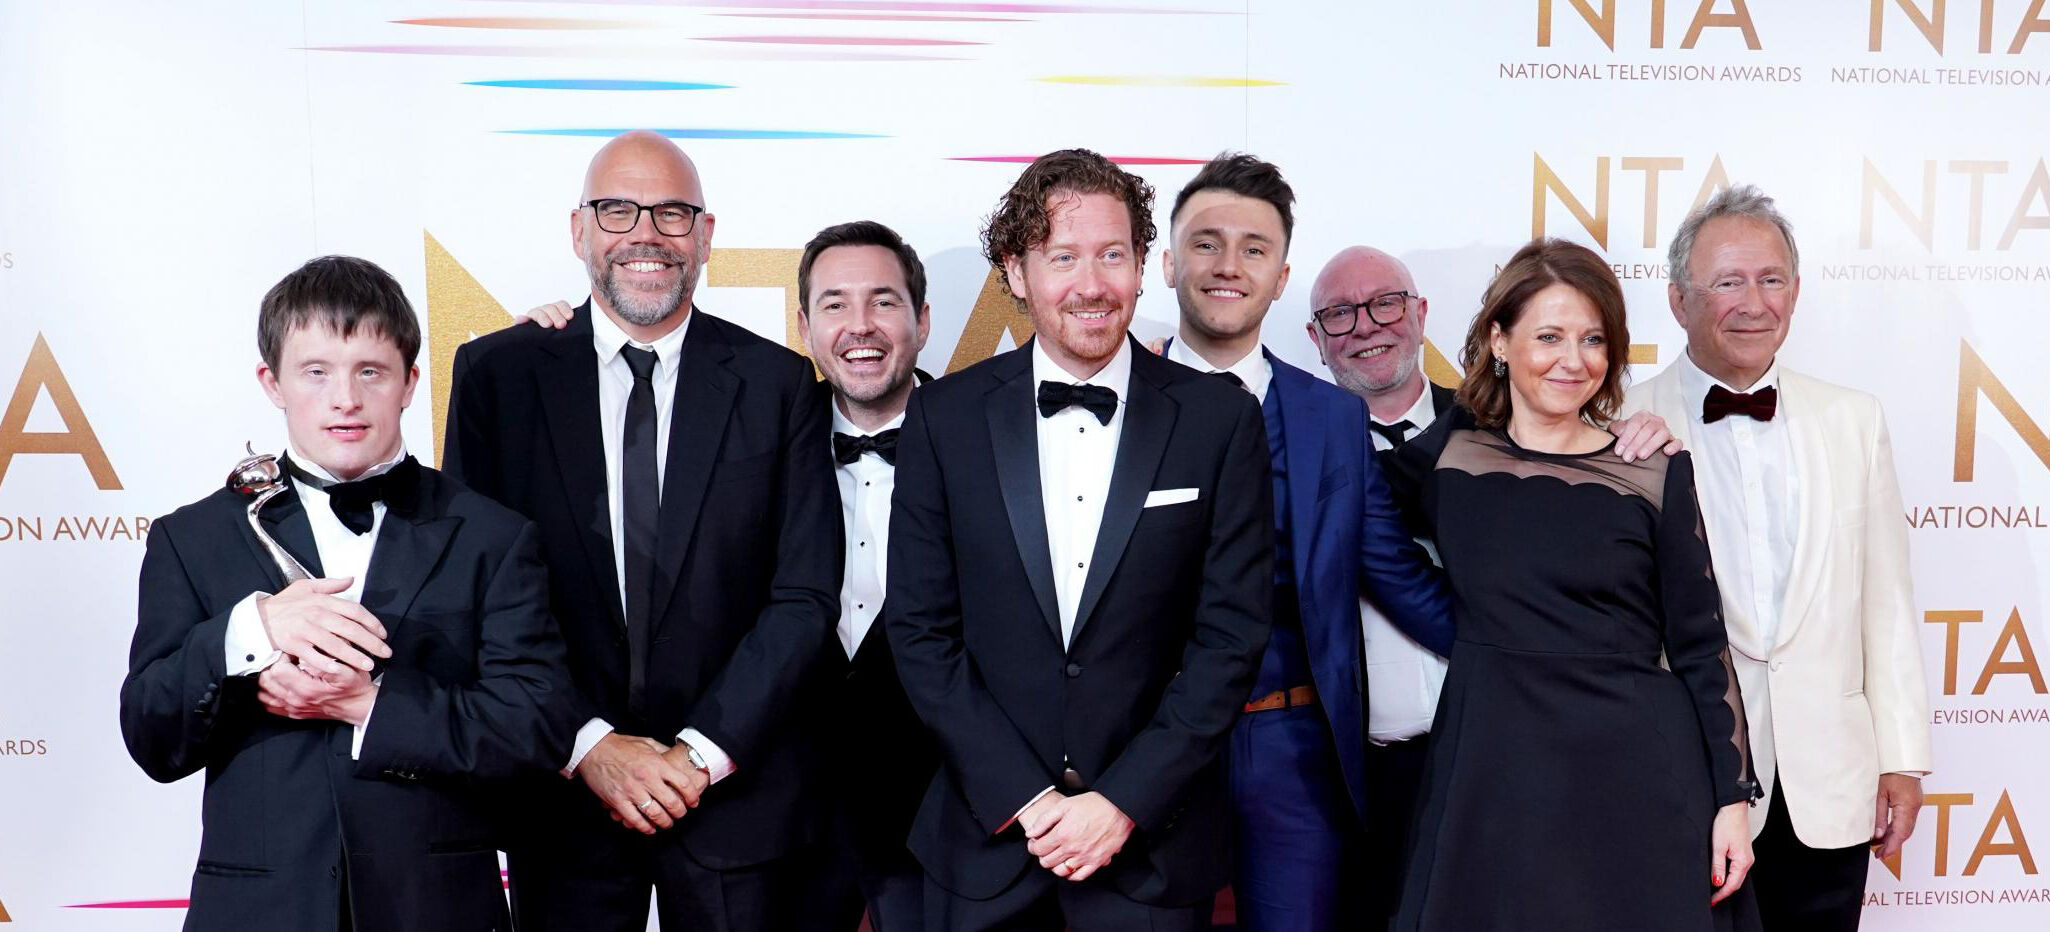 Image of Line of Duty cast and crew on the red carpet at the National TV Awards following their win for the Special Recognition Award